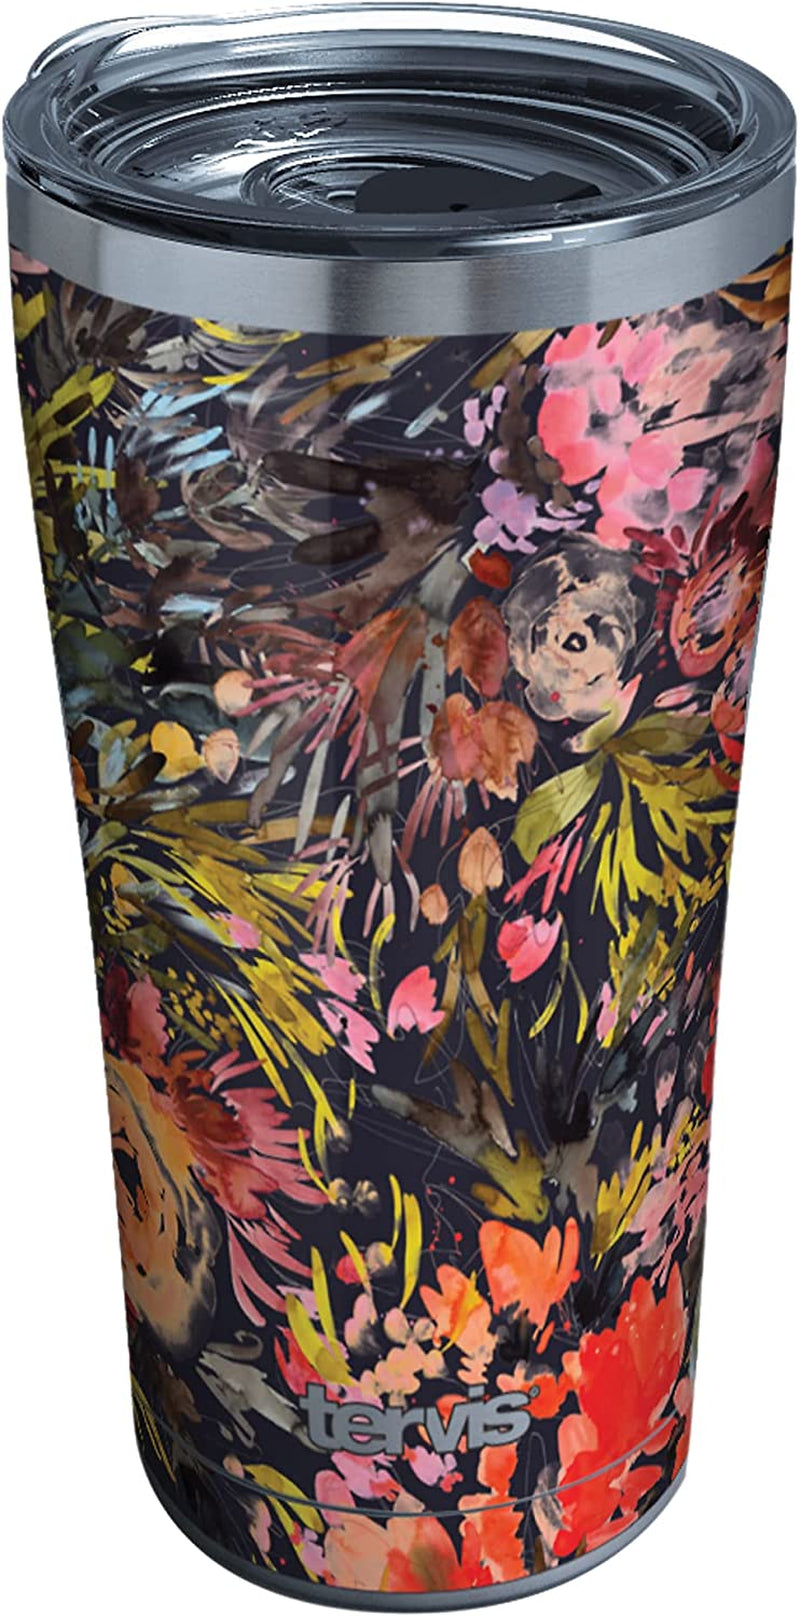 Tervis Made in USA Double Walled Kelly Ventura Floral Collection Insulated Tumbler Cup Keeps Drinks Cold & Hot, 16Oz 4Pk - Classic, Assorted Home & Garden > Kitchen & Dining > Tableware > Drinkware Tervis Bright Floral 20oz - Stainless Steel 